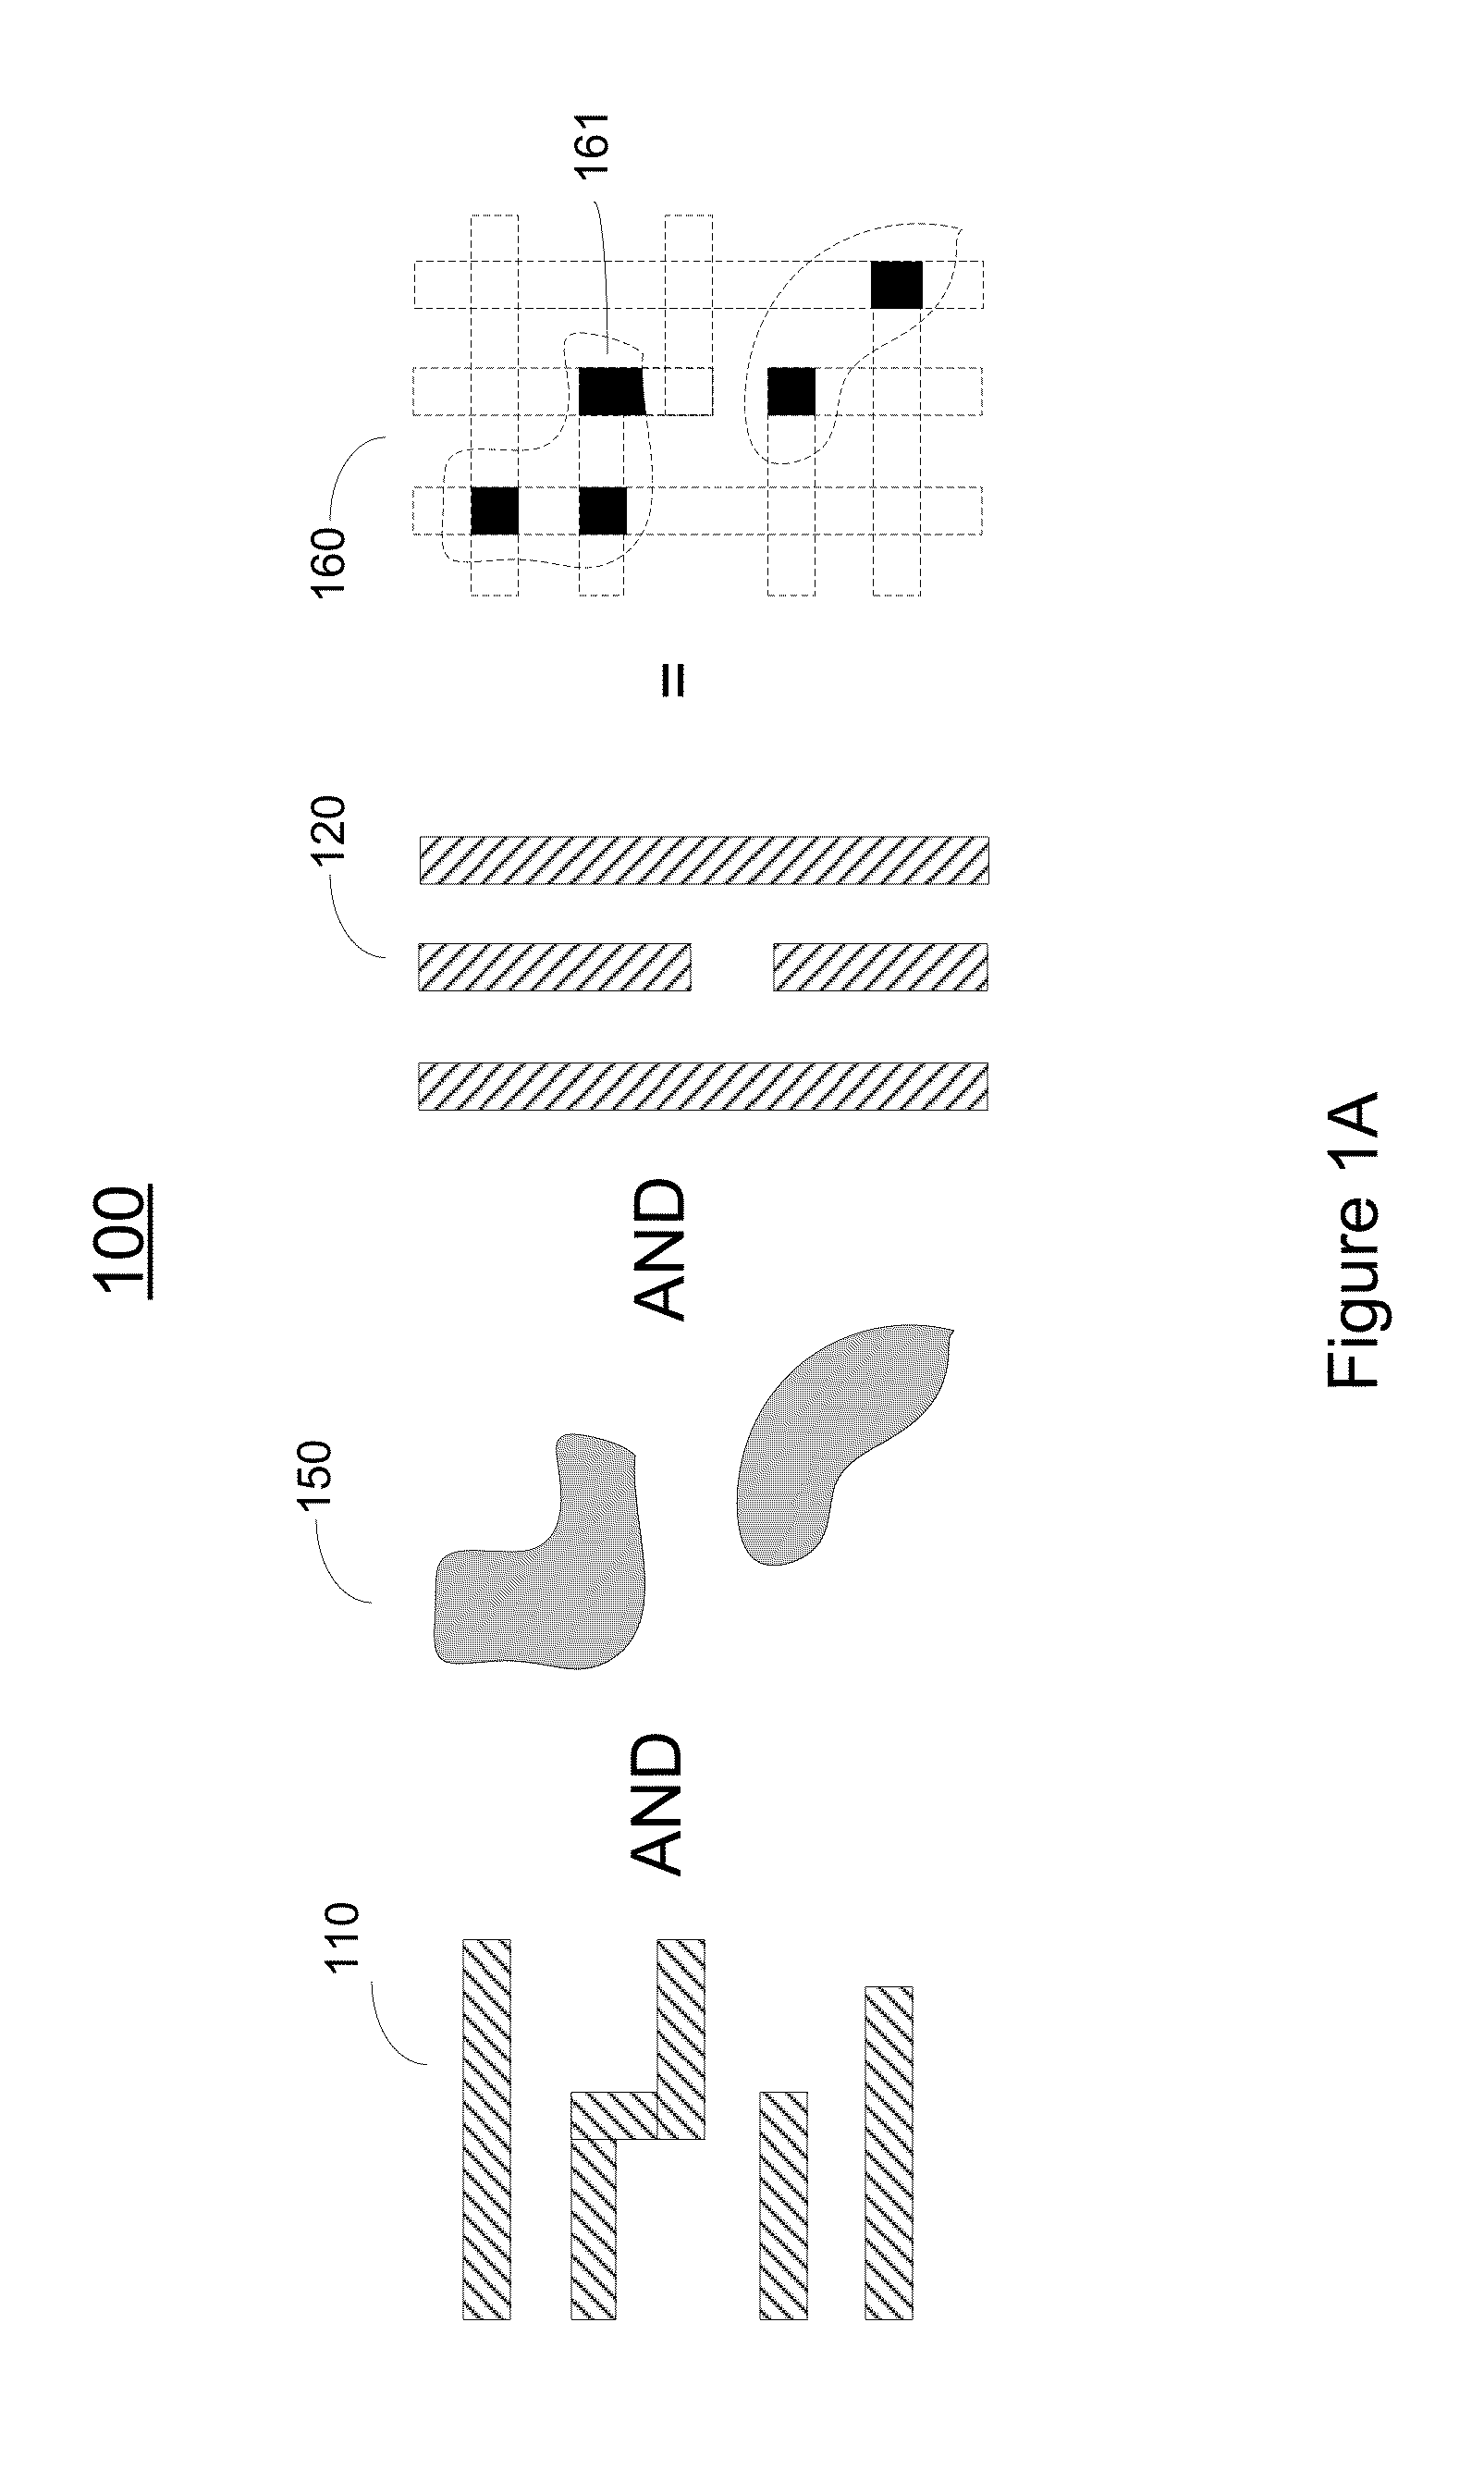 Self-aligned via interconnect using relaxed patterning exposure